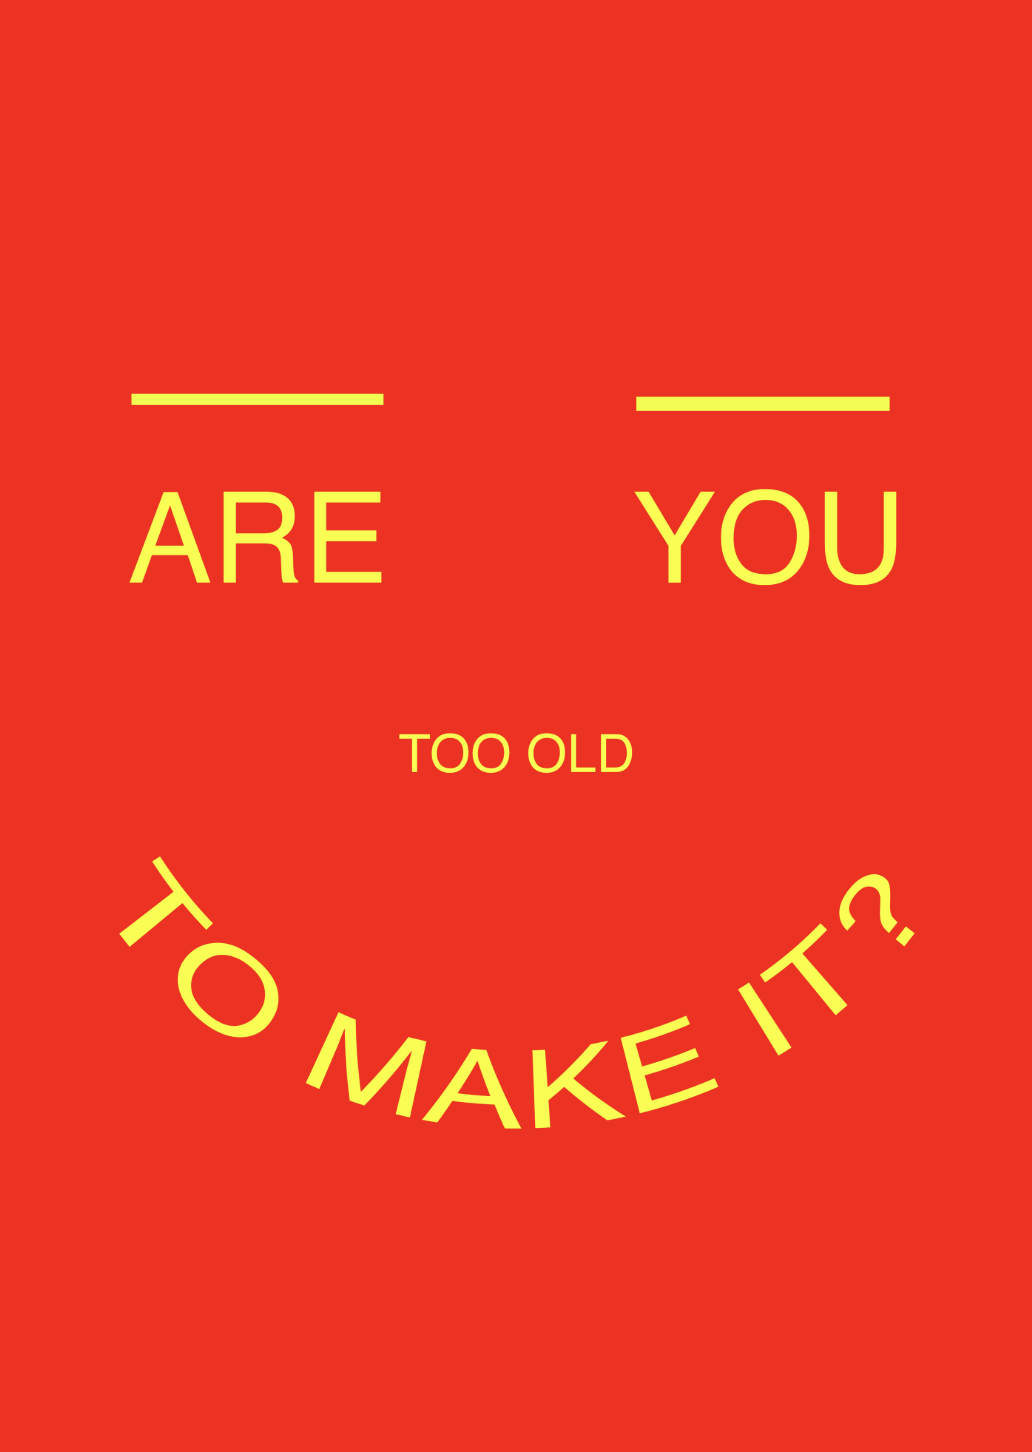 ARE YOU TOO OLD TO MAKE IT IN FASHION?